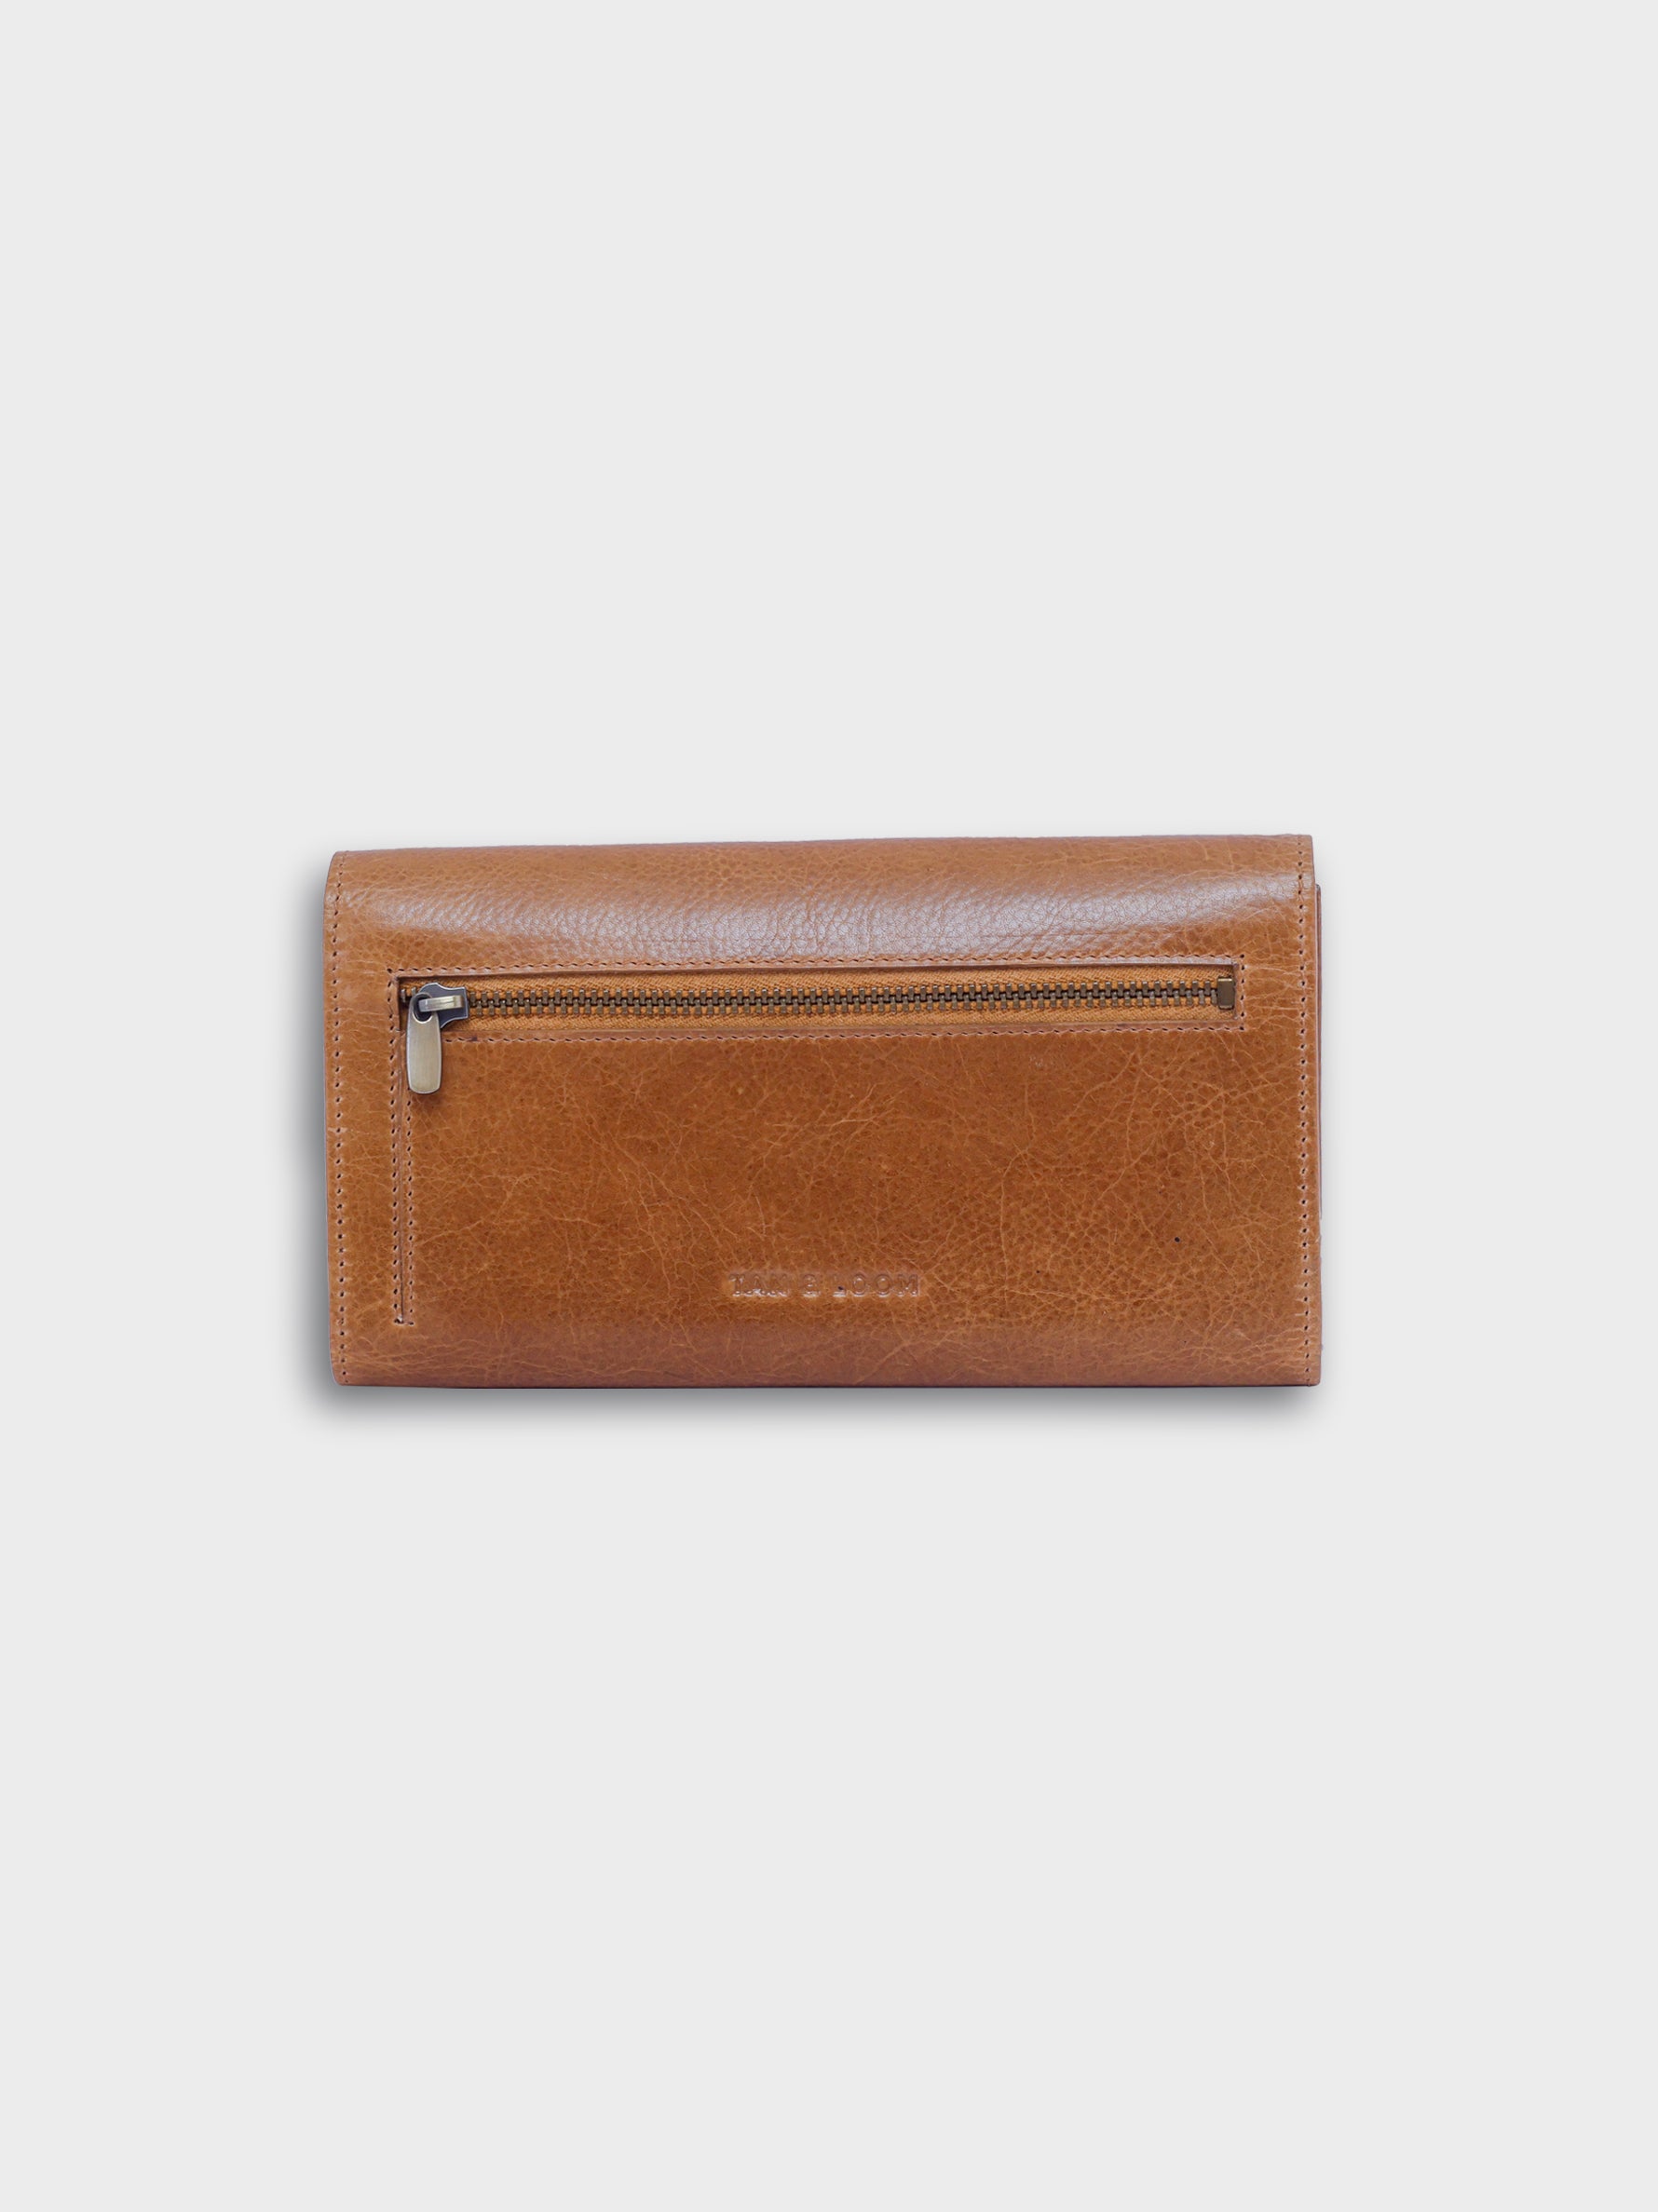 Handcrafted Genuine Vegetable Tanned Leather Envelope Wallet Tuscany Tan for Women Tan & Loom